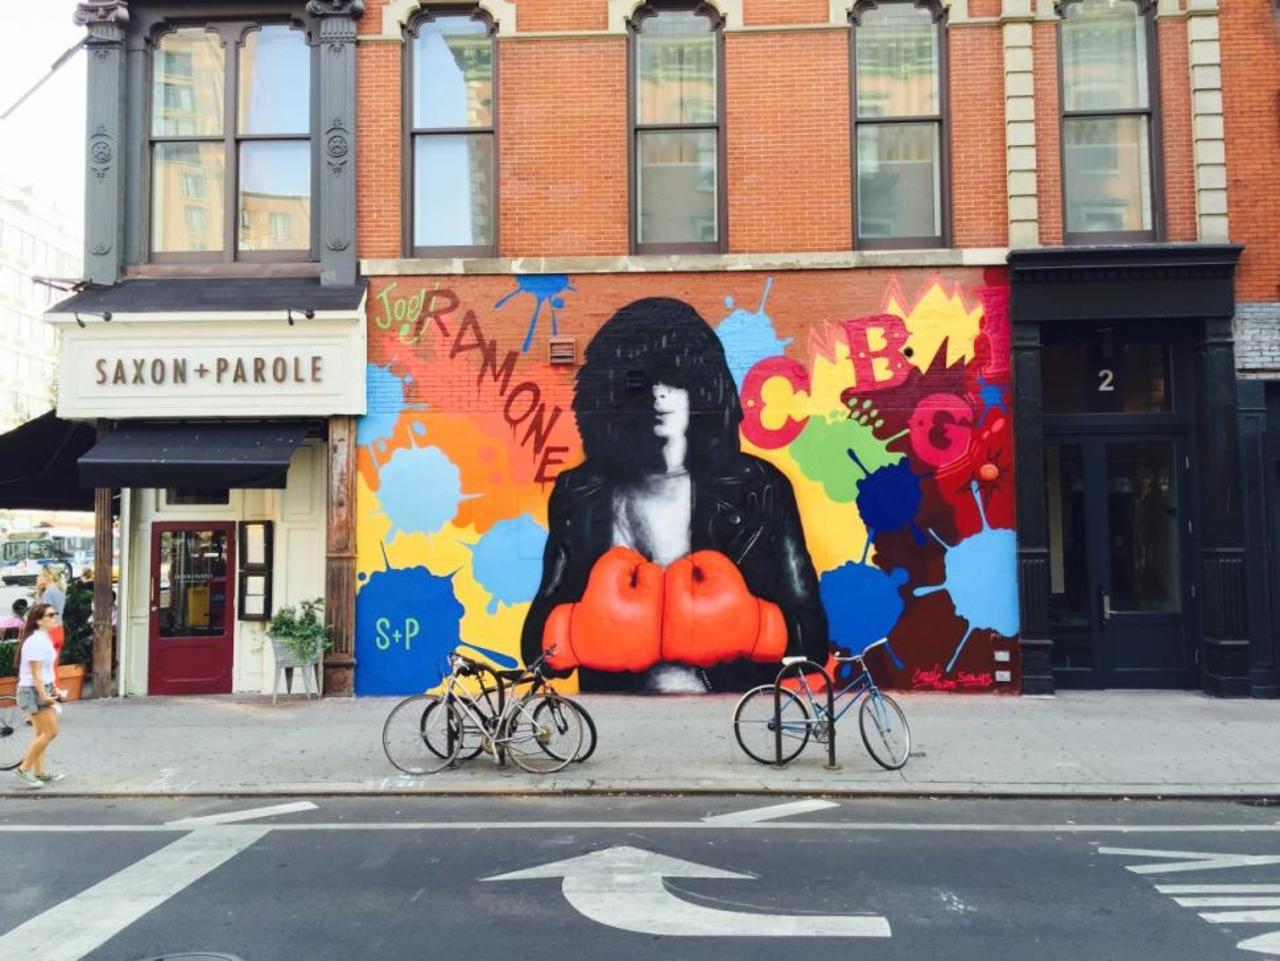 #NYC #LowerEastSide #tribute to #CBGB and the #Ramones Remarkable new #graffiti #mural by two very talented artists http://t.co/uLasm3OH26